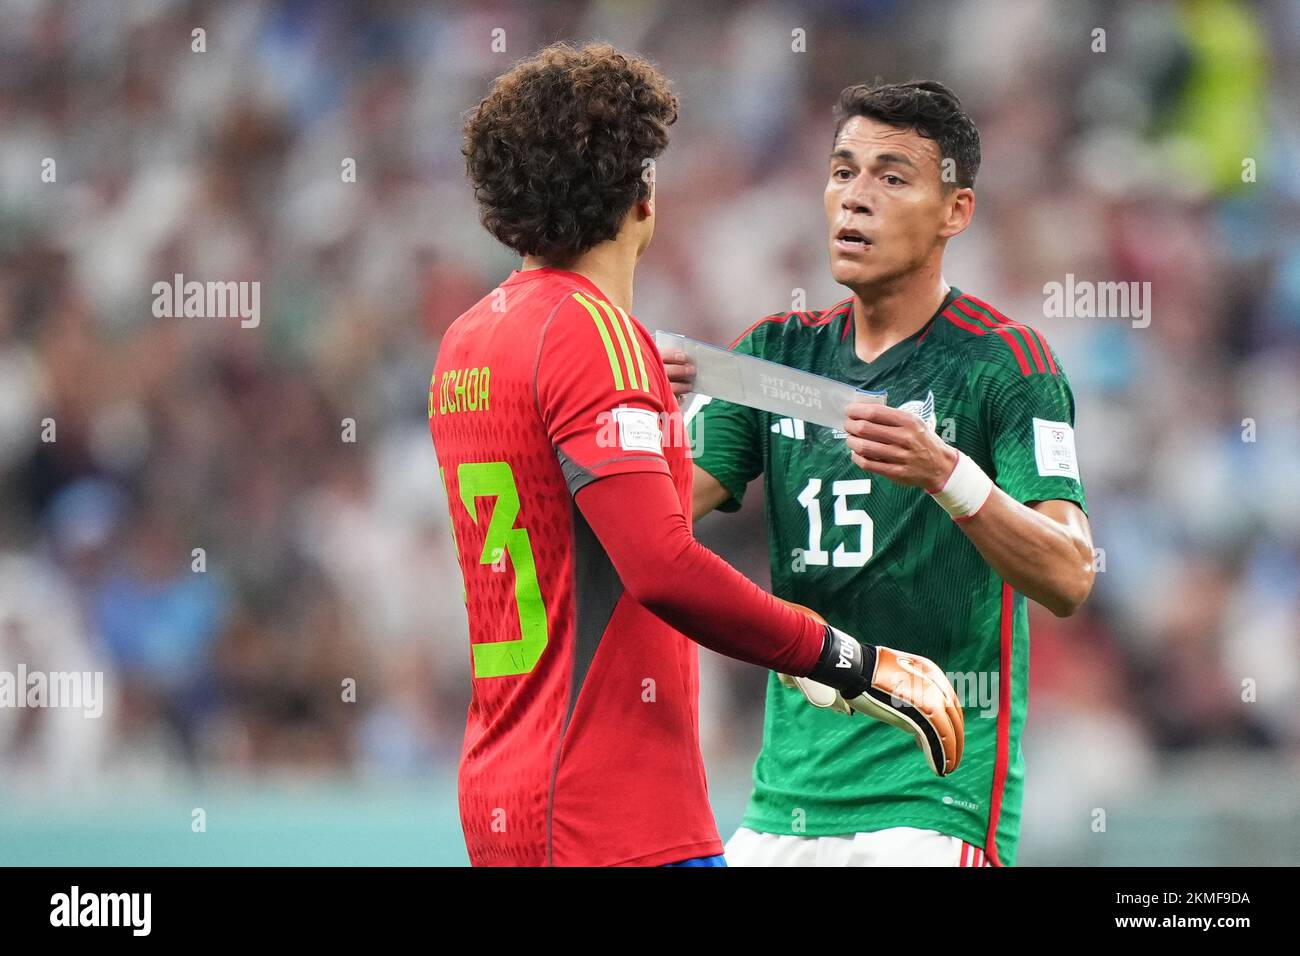 Hector Moreno and Guillermo Ochoa of Mexico during the FIFA World Cup Qatar 2022 match, Group C, between Argentina and Mexico played at Lusail Stadium on Nov 26, 2022 in Lusail, Qatar. (Photo by Bagu Blanco / PRESSIN) Credit: PRESSINPHOTO SPORTS AGENCY/Alamy Live News Stock Photo